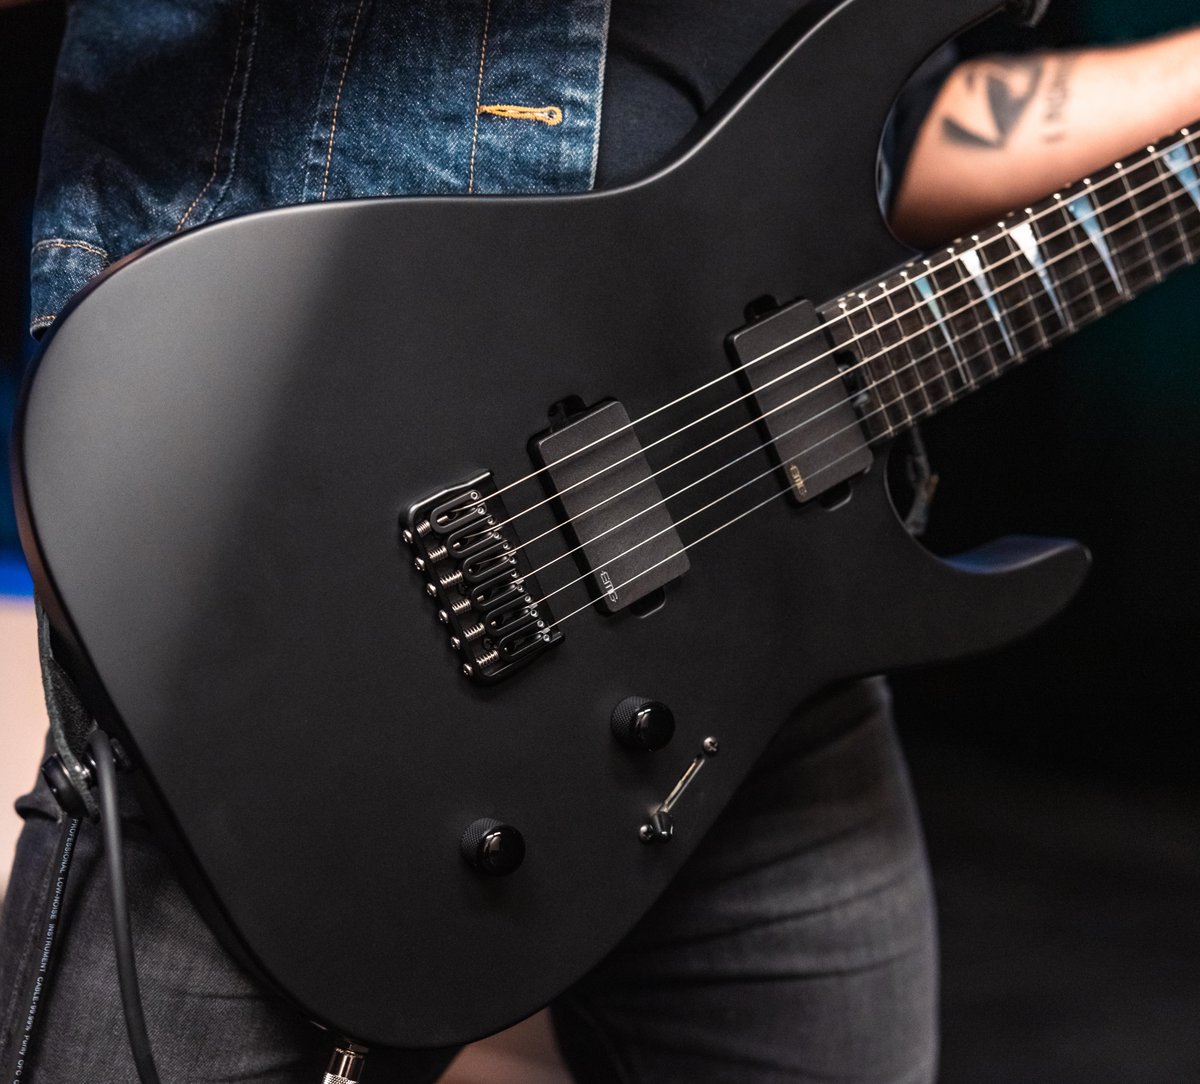 The American Series Soloist SL2MG is equipped with EMG 81 and 85 pickups, delivering powerful yet clear tones ideal for modern metal. See more: bit.ly/45426Fr